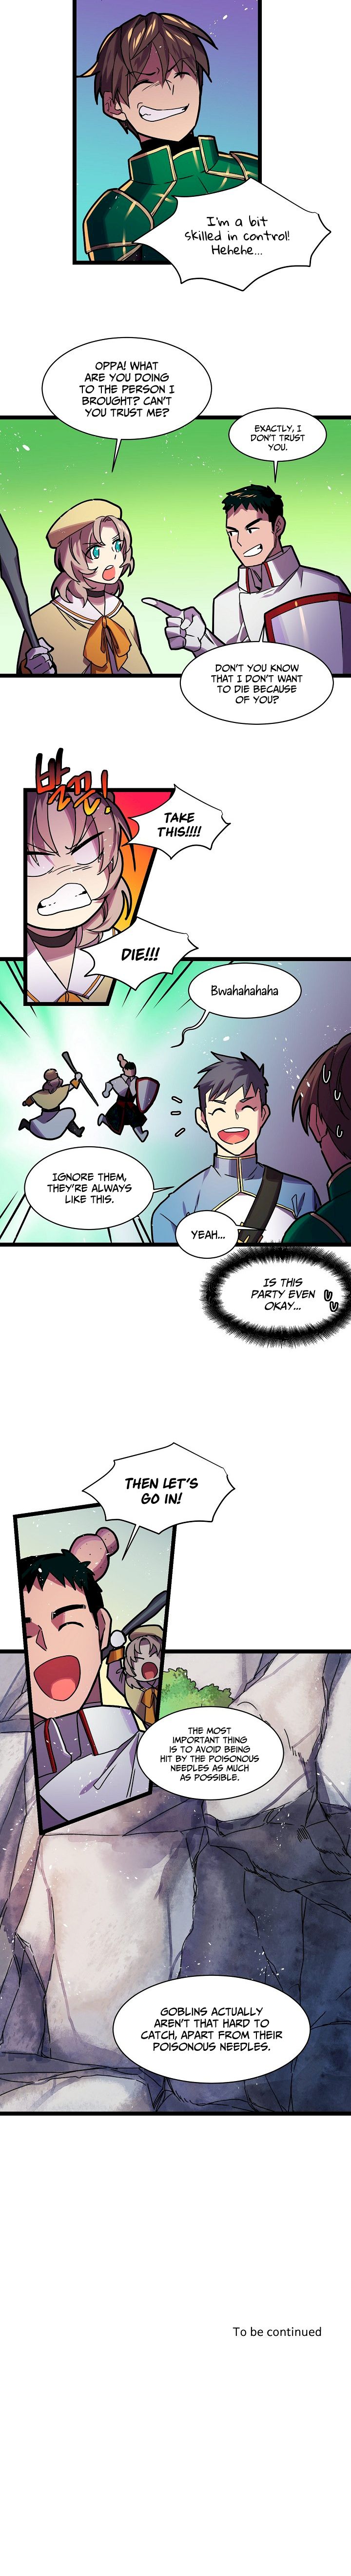 Ranker’s Return - Chapter 9 Page 7